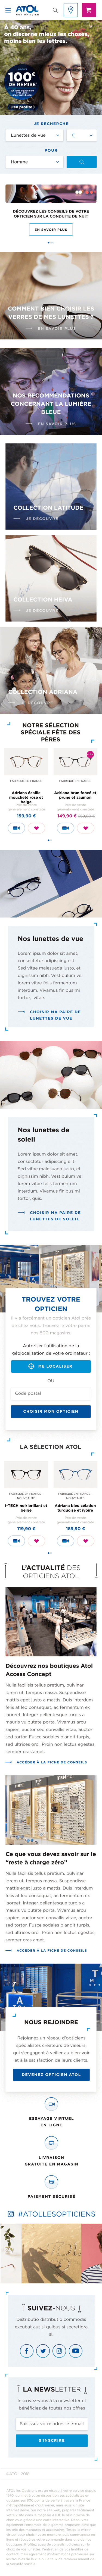 Agence-DND-Creation-Site-ECommerce-Atol-les-Opticiens